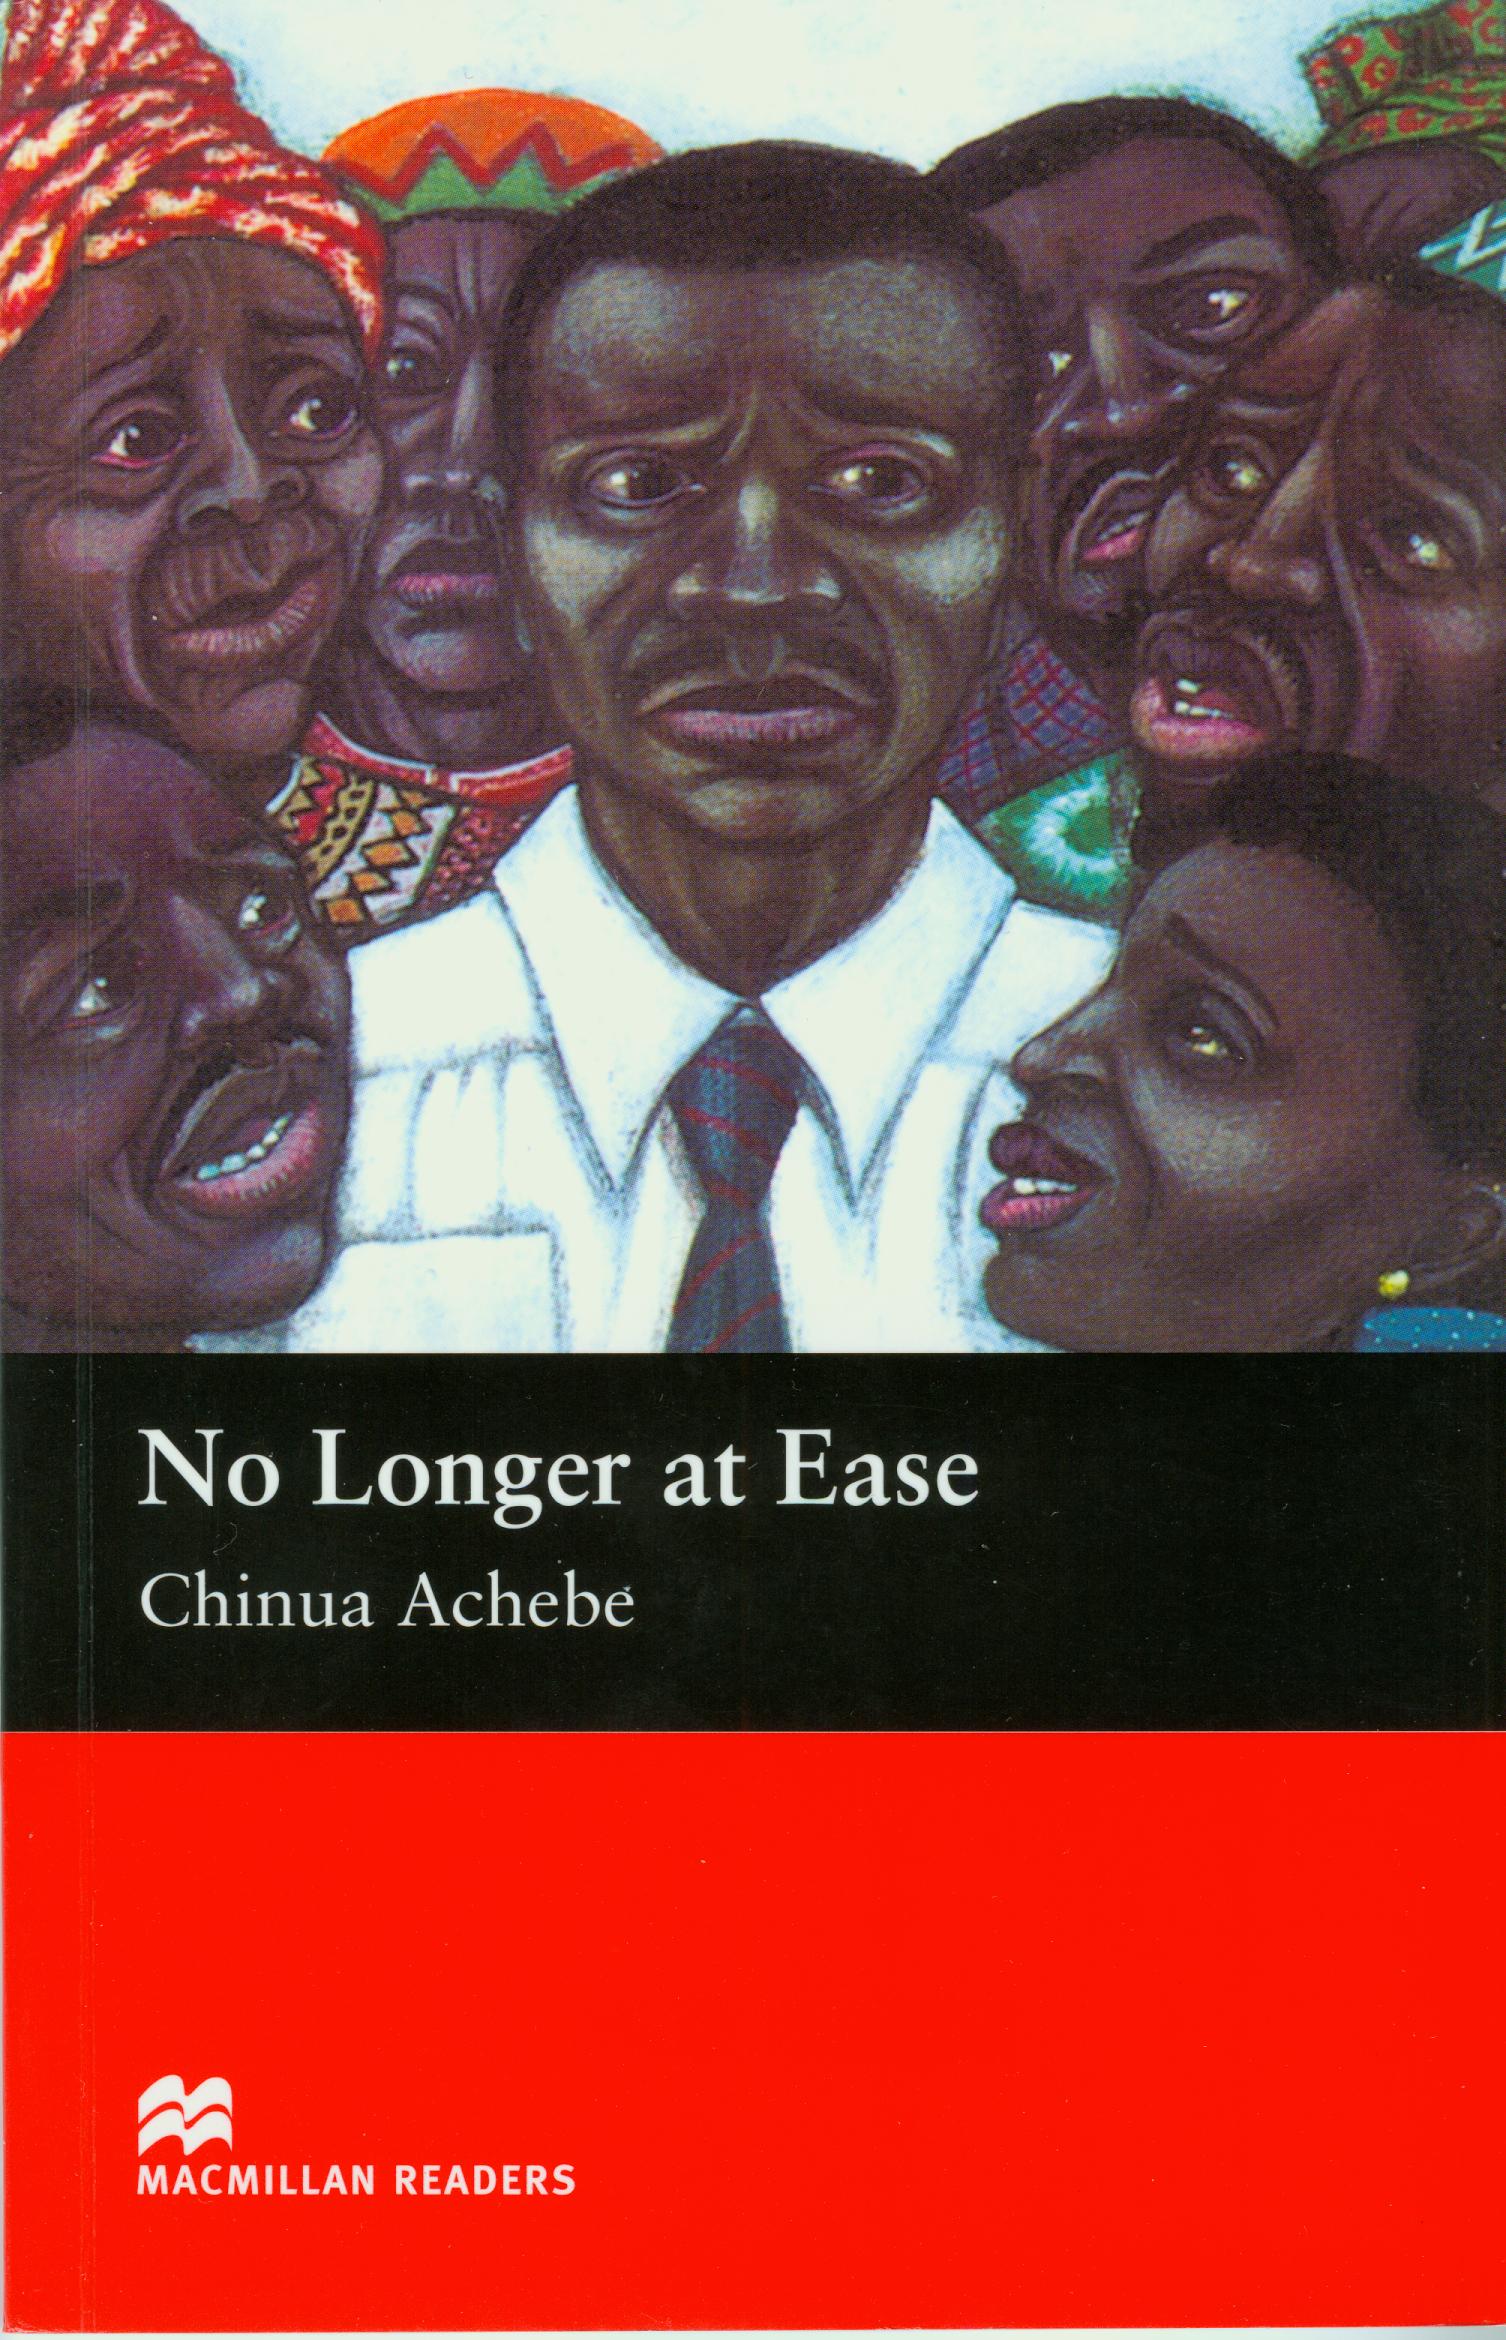 No Longer at Ease by Chinua Achebe